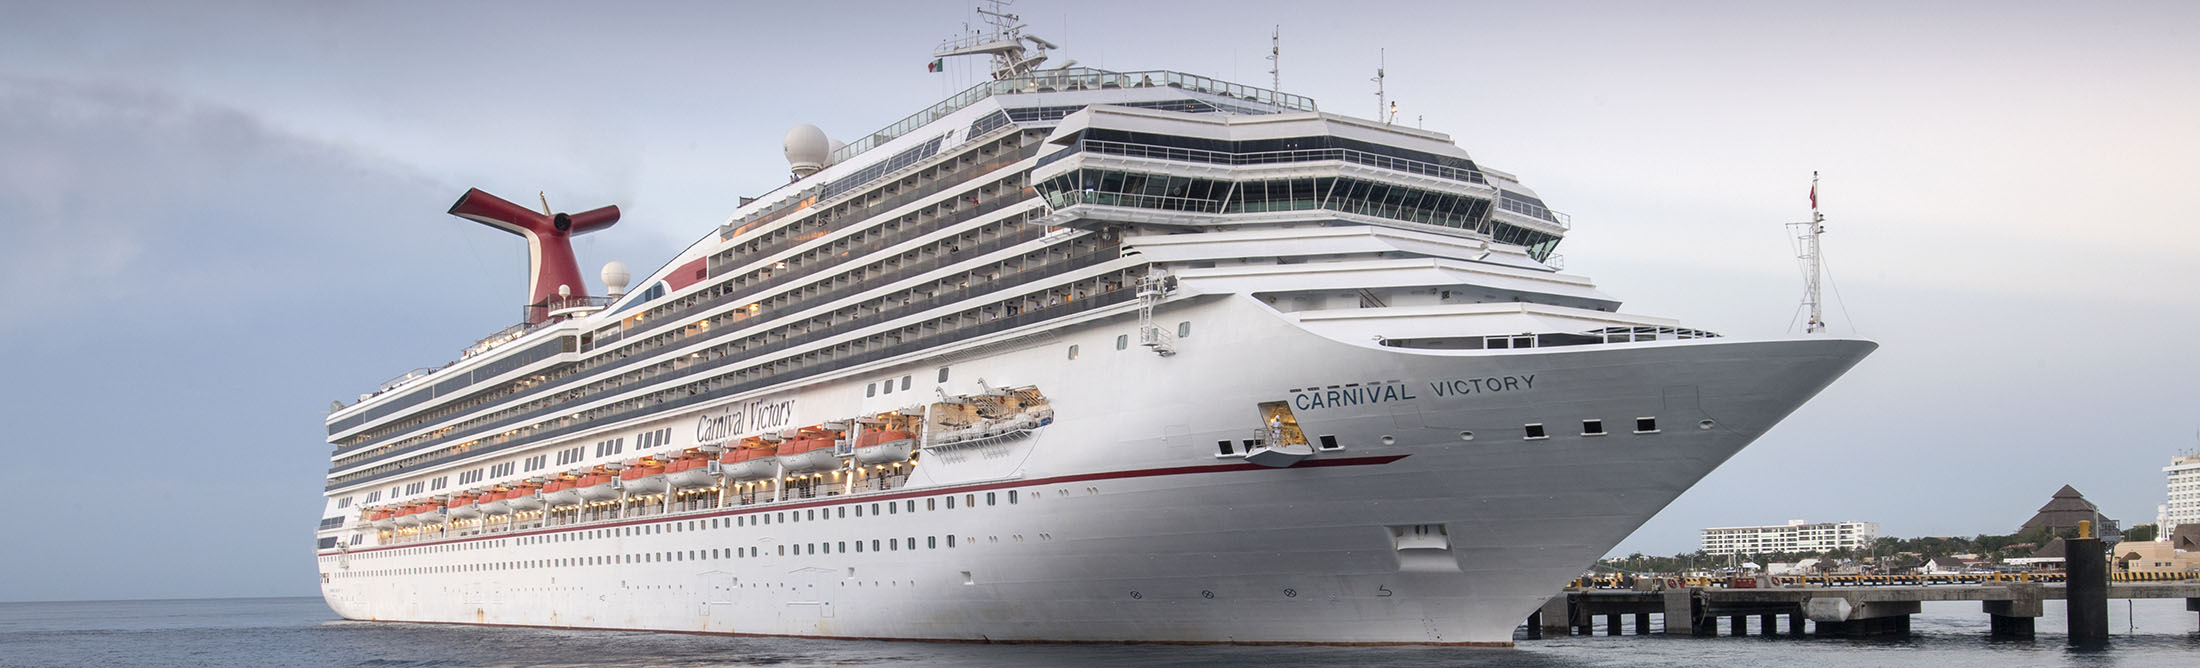 Age to gamble on carnival cruise